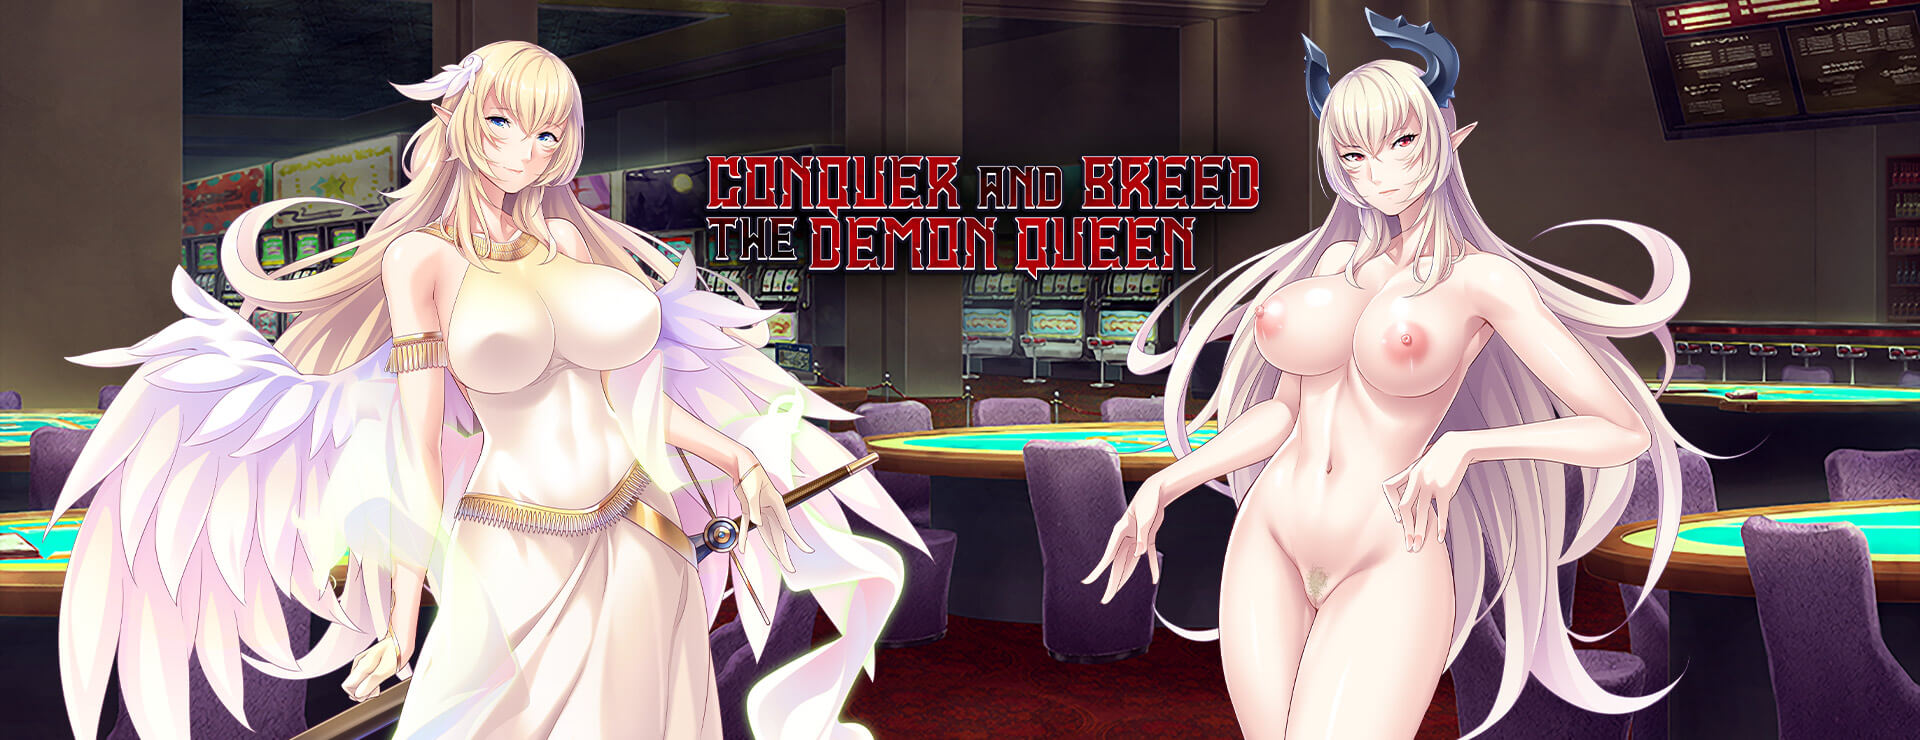 Conquer and Breed the Demon Queen - 虚拟小说 遊戲